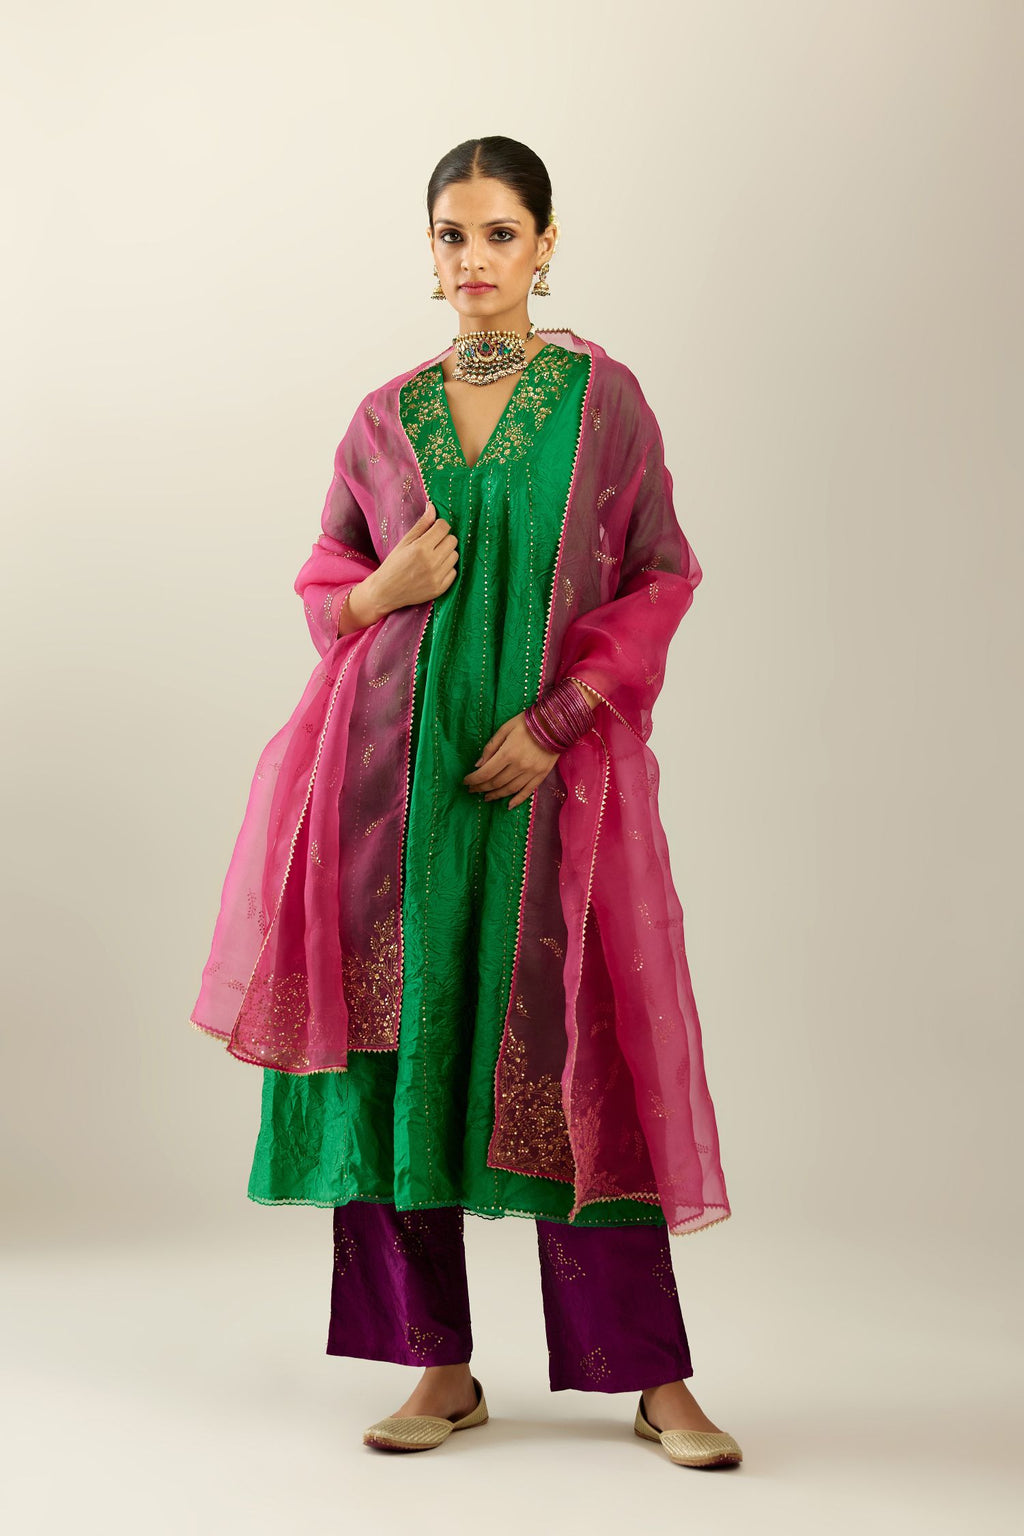 Grass green hand crushed silk kurta dress set with a V neck embroidered yoke and panels.